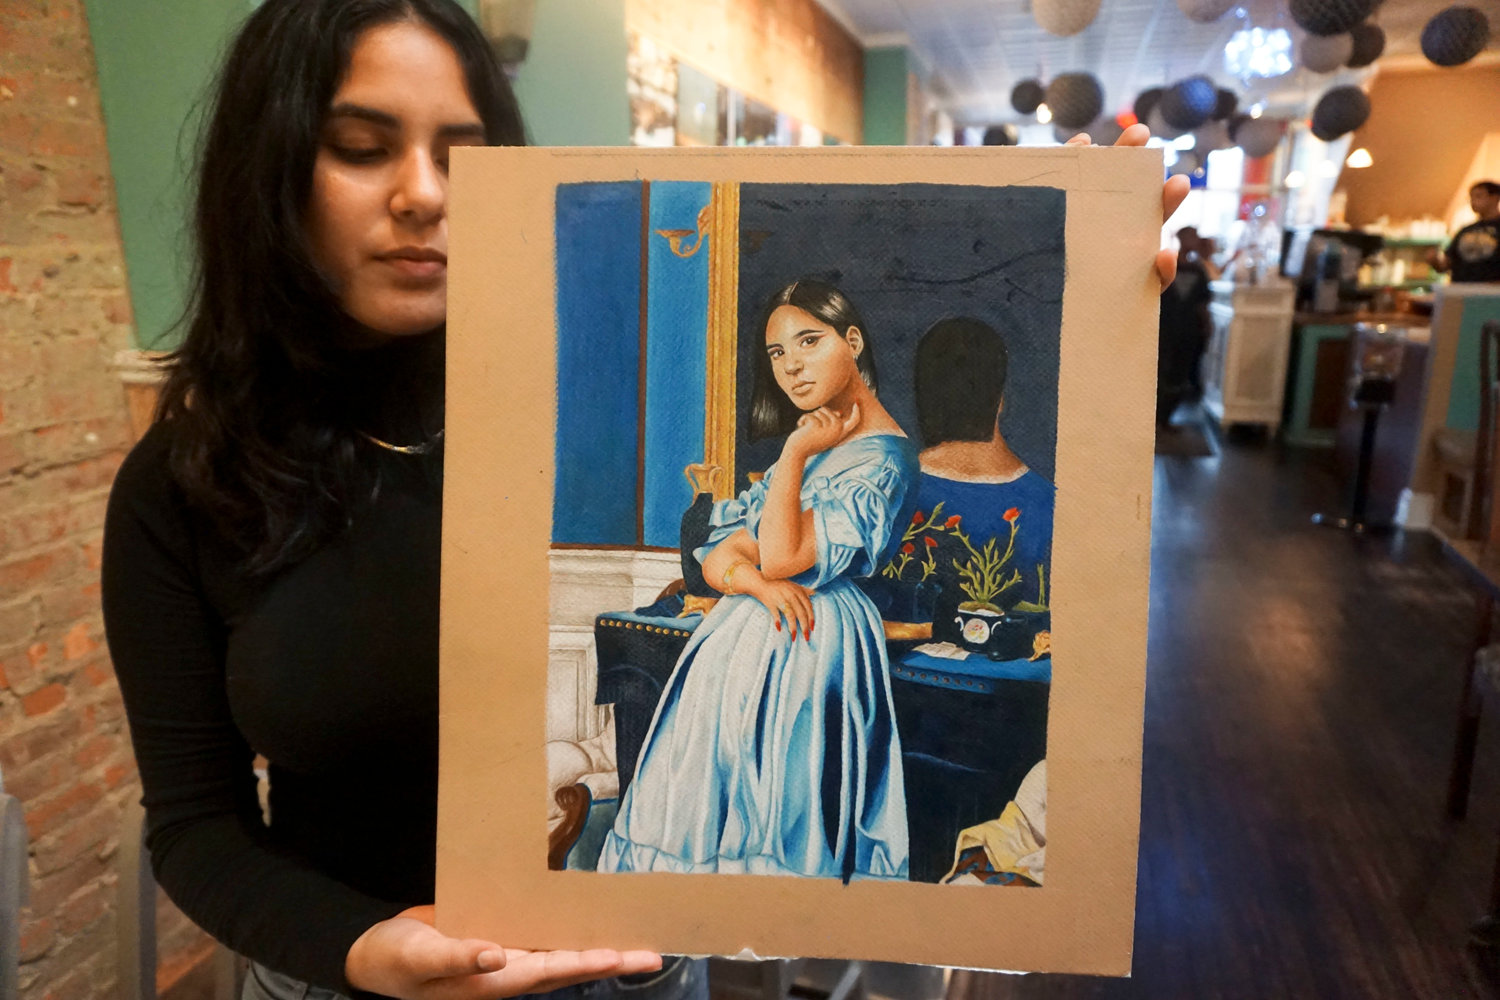 Recent Central graduate Paula Guevara with her favorite self-portrait, which she worked on for five months.